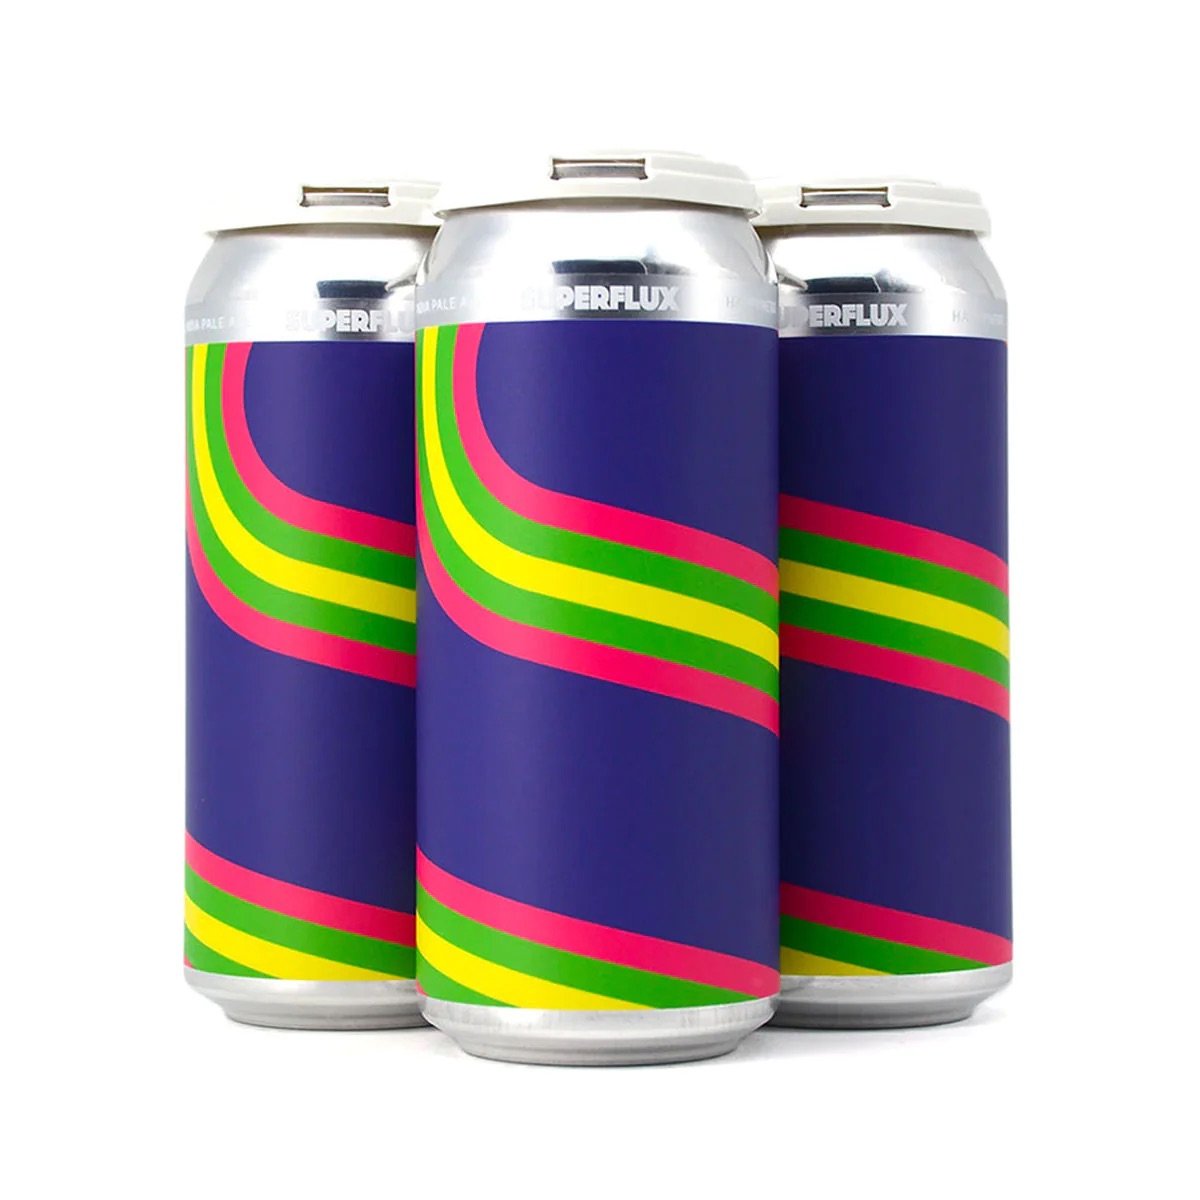 Superflux-Happyness-IPA-4-Pack-Cans.jpg